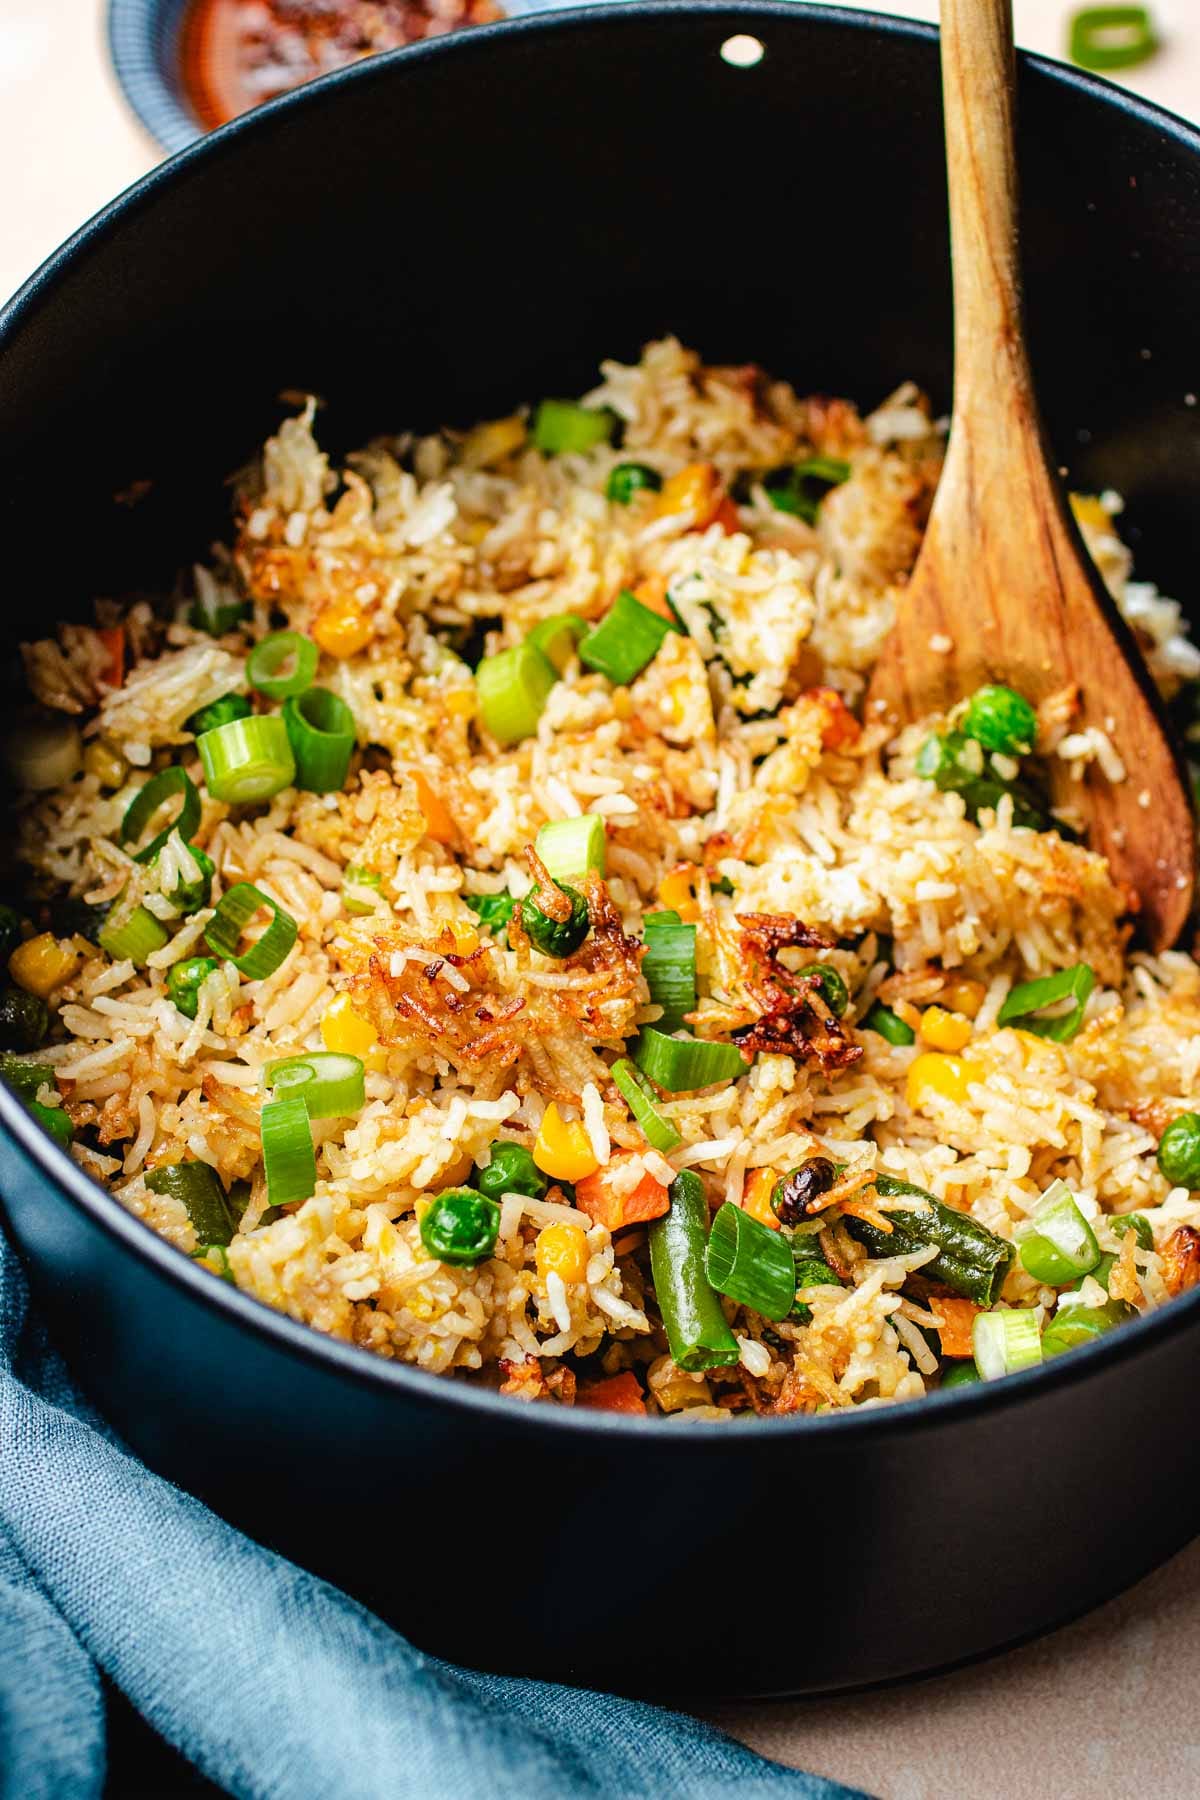 A side close feature shows perfectly air fried fried rice with frozen vegetables cooked to golden brown crisp